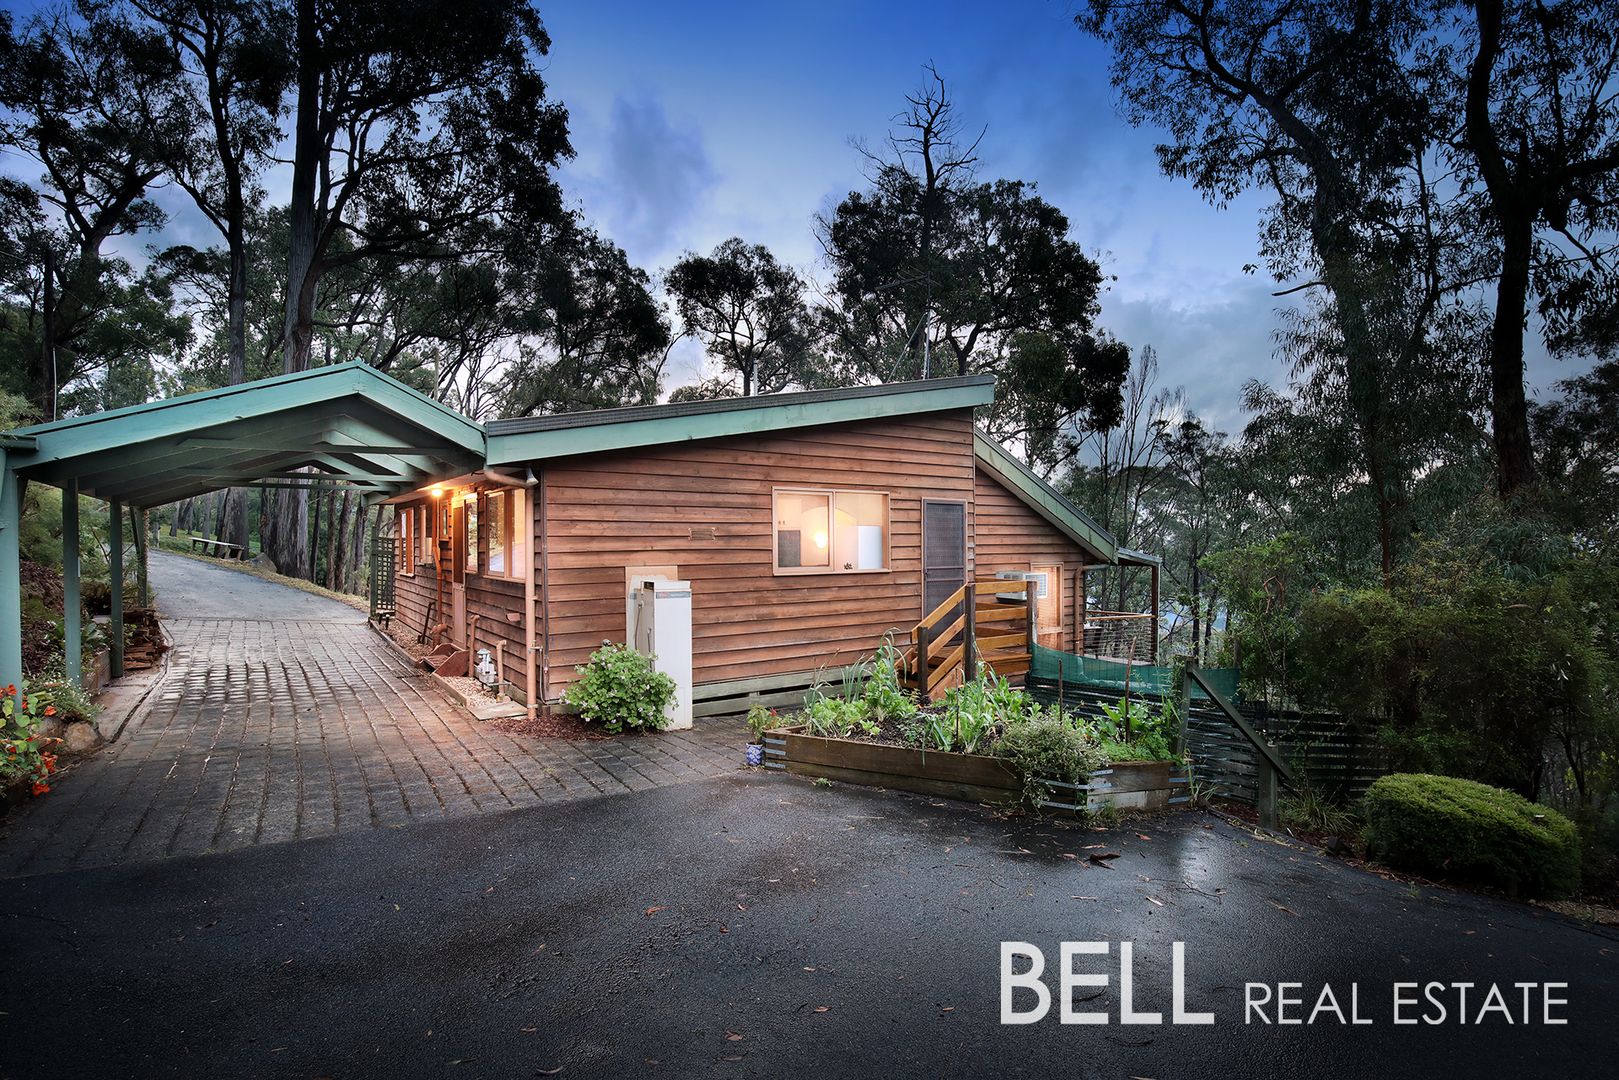 75 Inverness Road Mount Evelyn Vic 3796 House For Sale